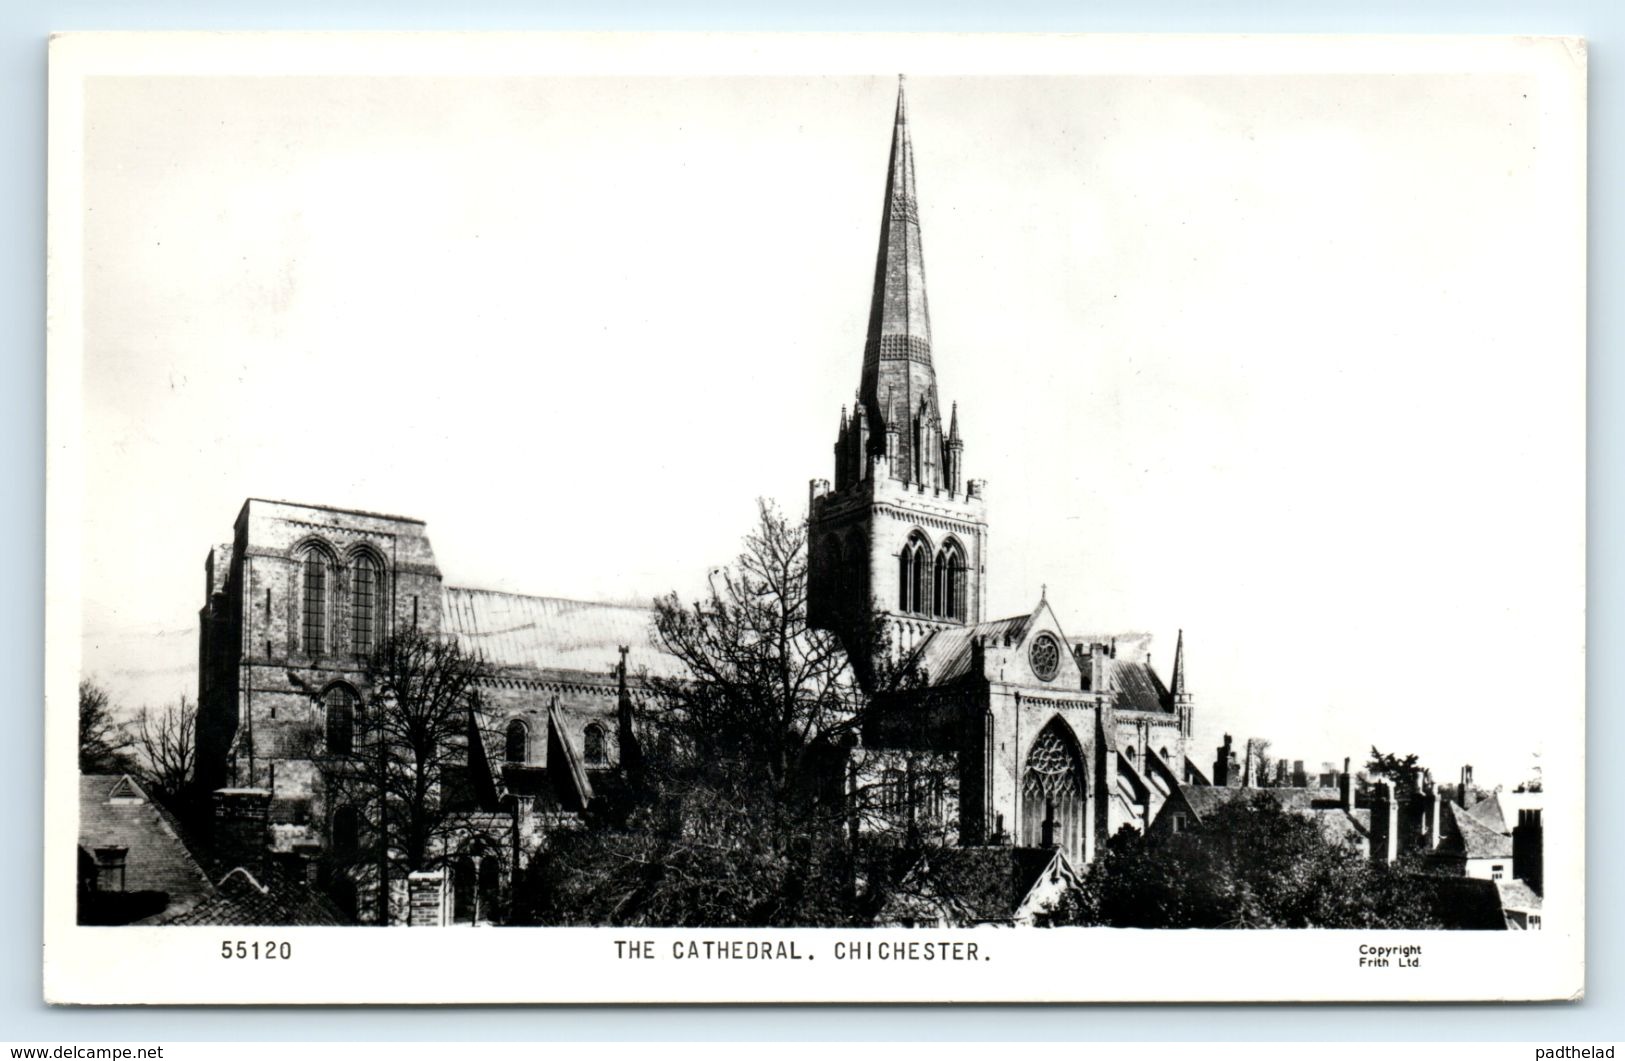 POSTCARD 55120 THE CATHEDRAL CHICHESTER FRITH RPPC BW POSTED 1976 RPPC SENT TO BANGOR NORTH WALES - Chichester